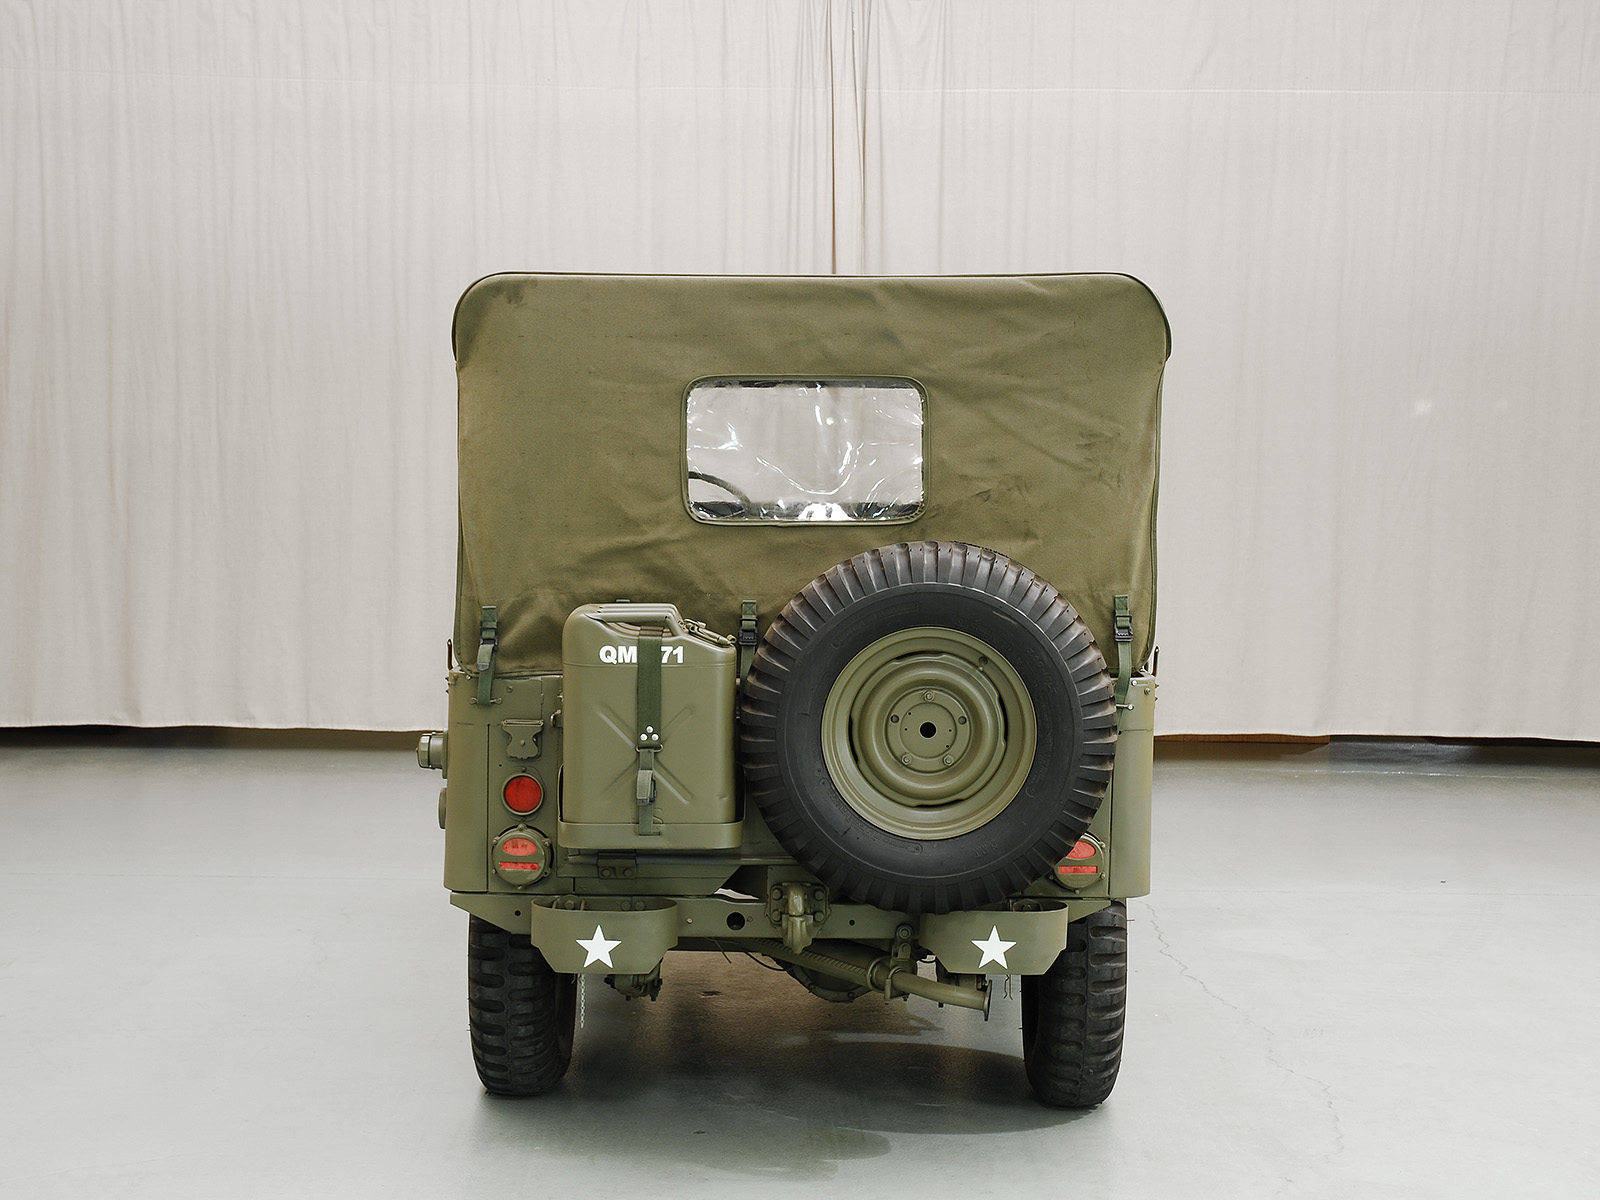 1956 willys-overland m38a1 1/4 ton